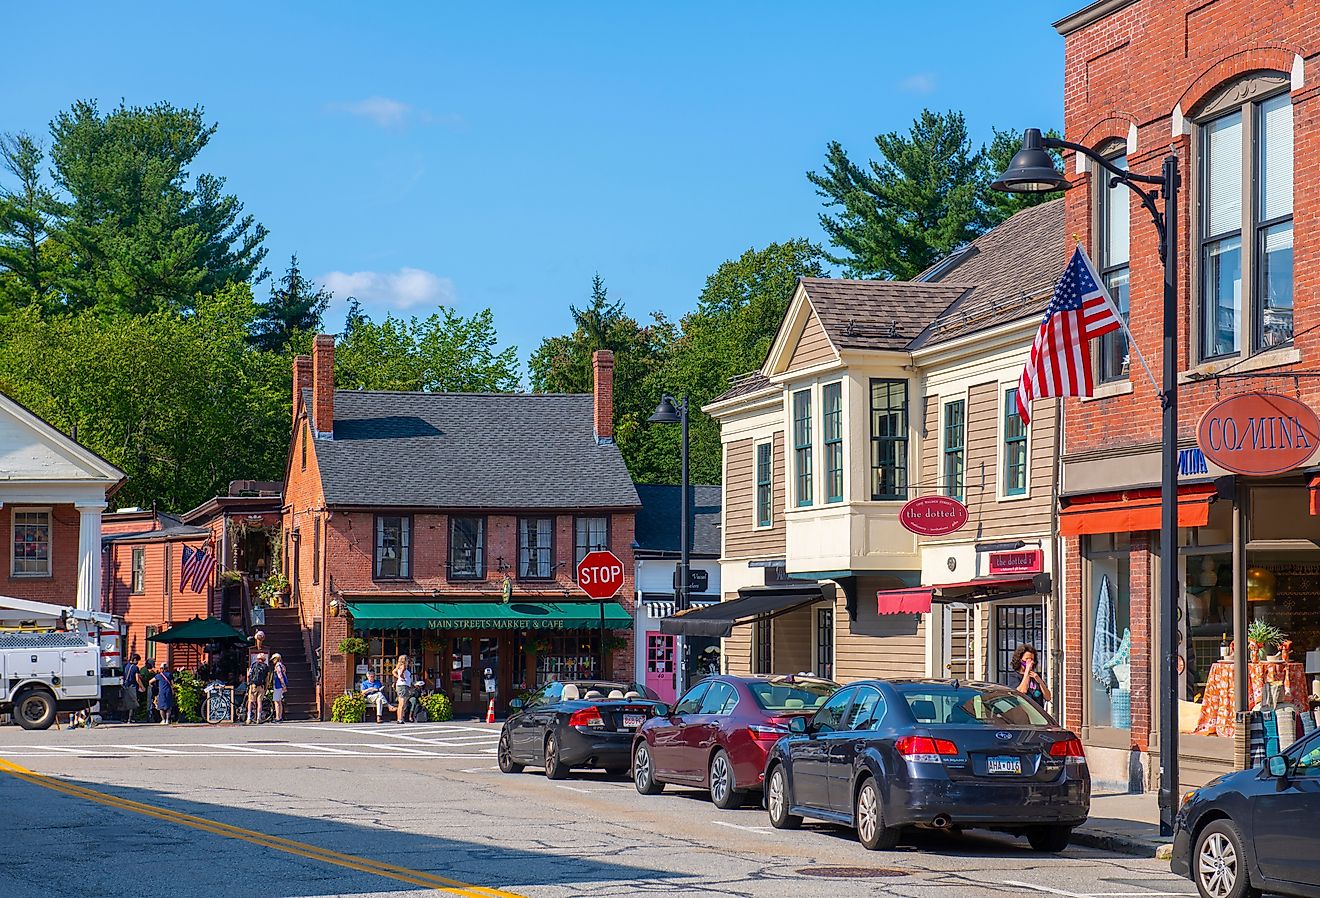 Main Streets Market and Cafe in the historic town center, Concord, Massachusetts. Image credit Wangkun Jia via Shutterstock.com